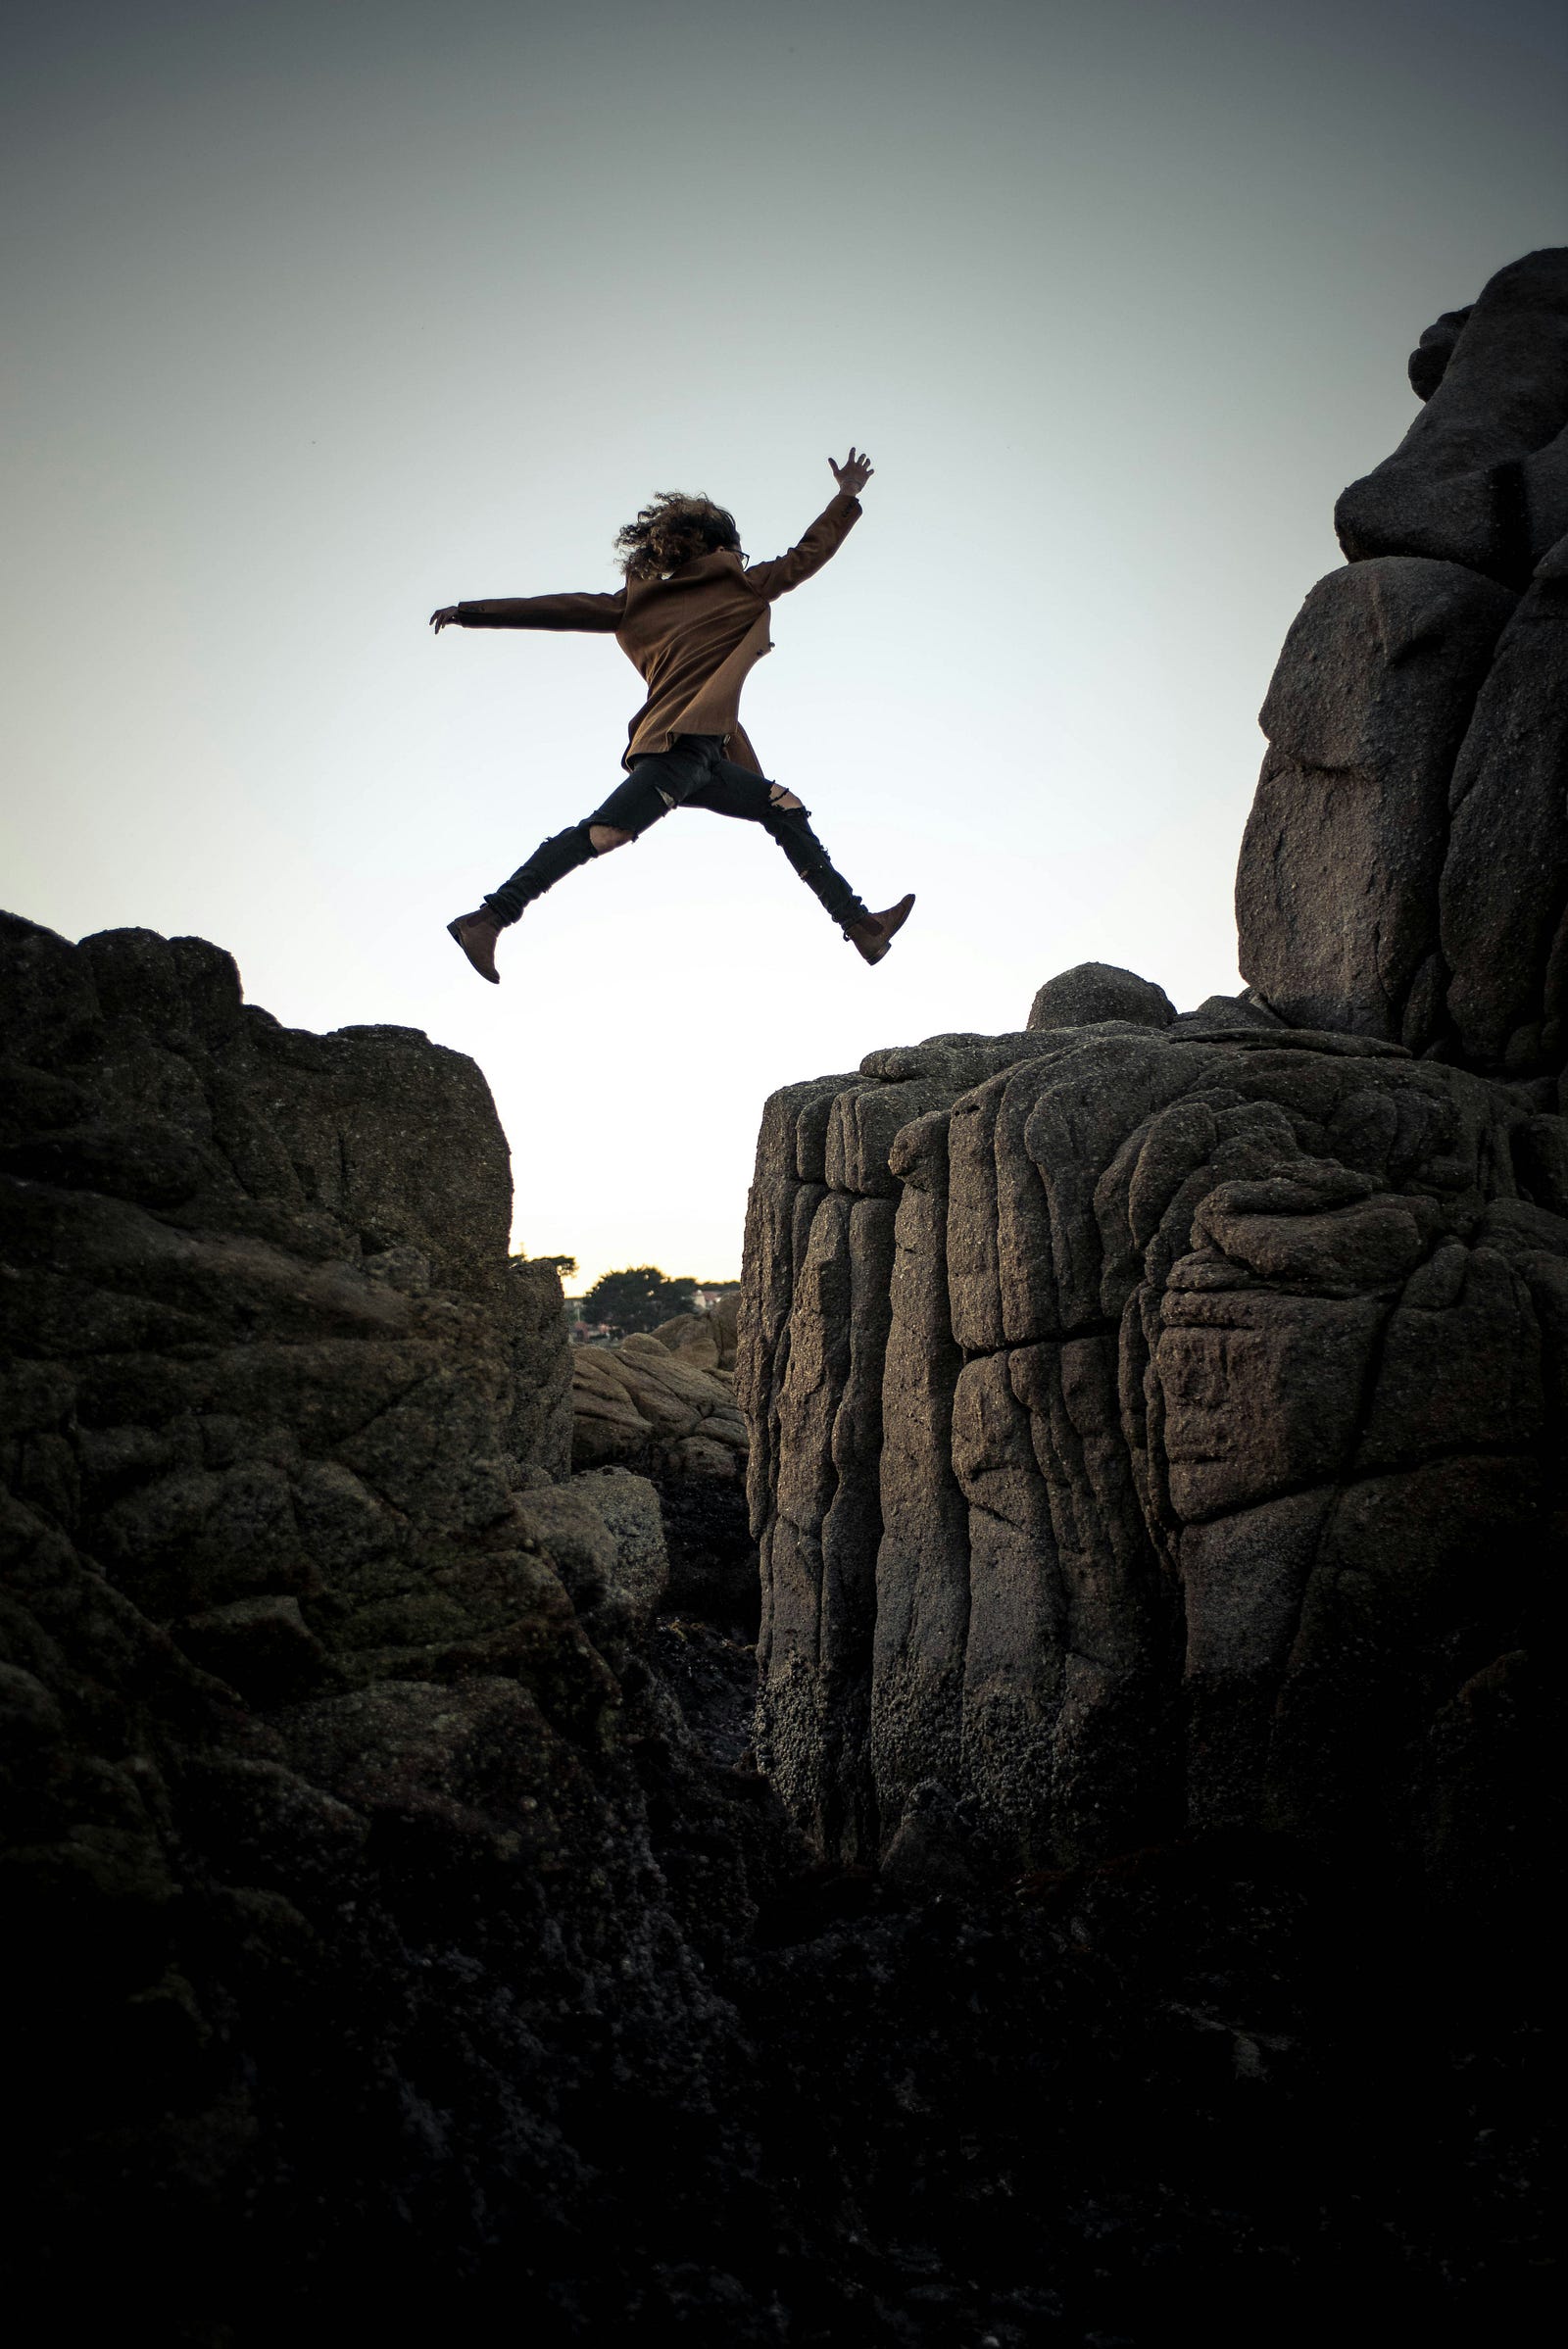 A young person jumps from one moutaintop cliff edge to another.